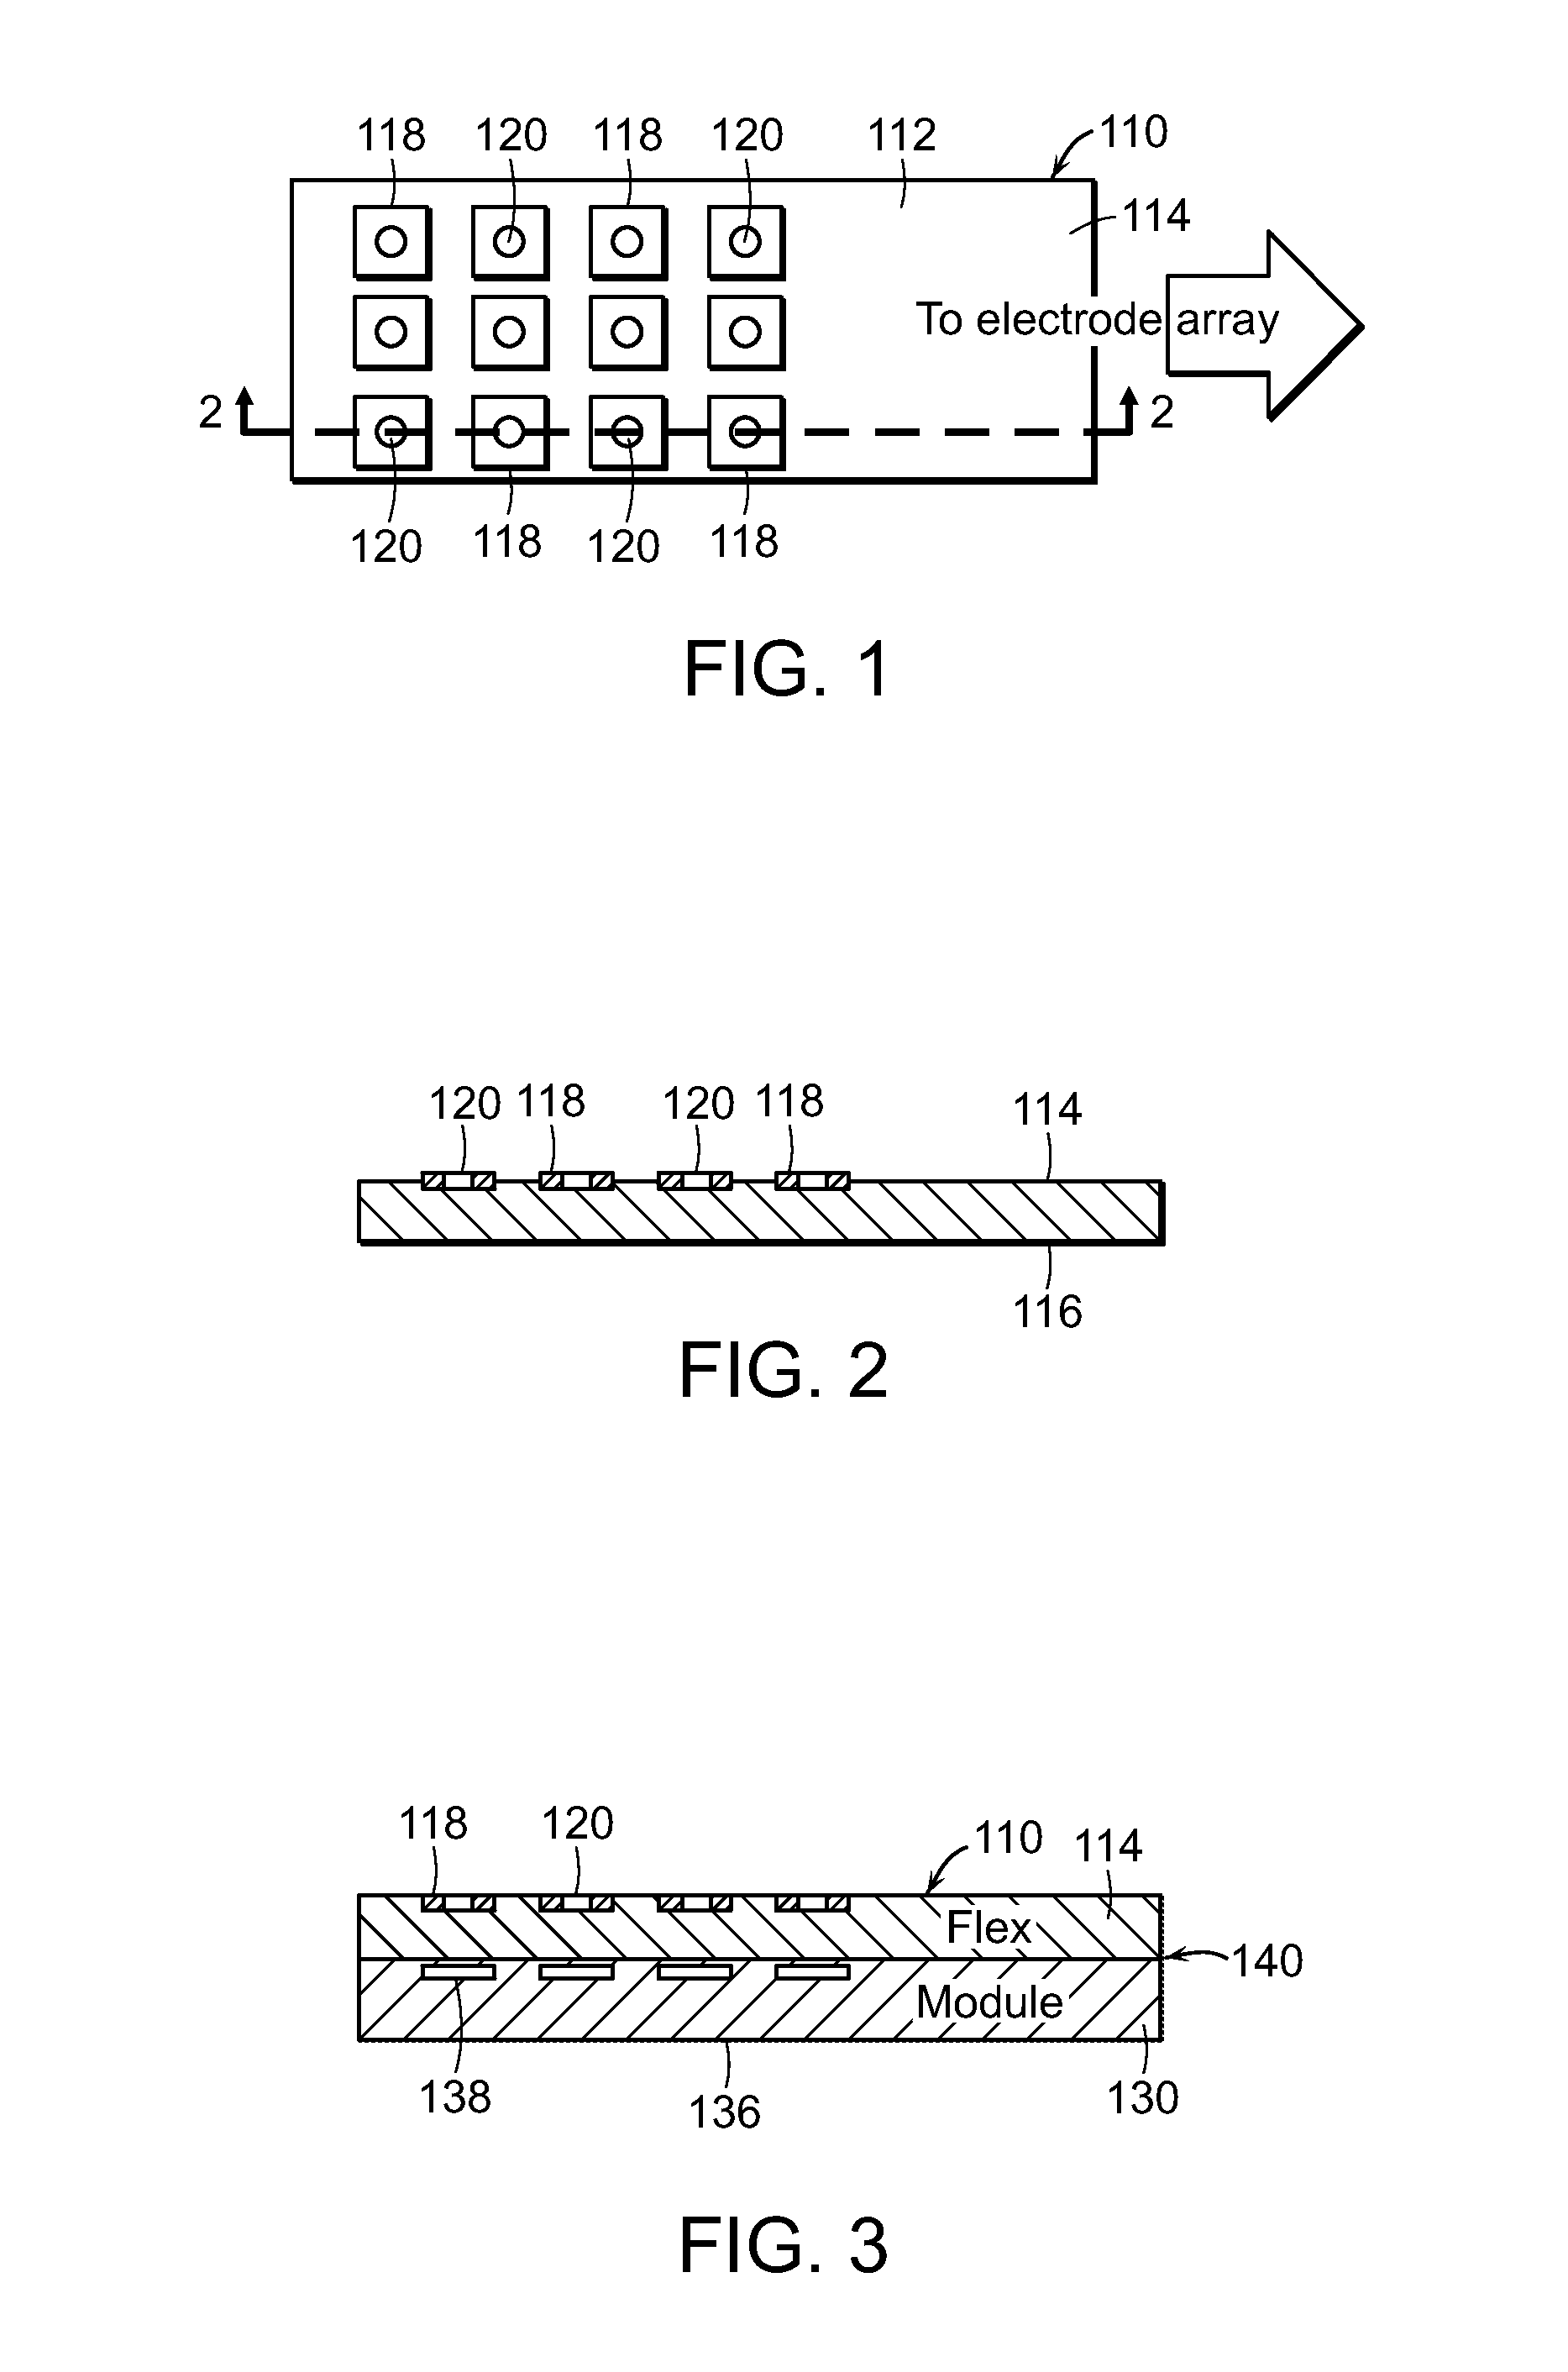 Methods for bonding a hermetic module to an electrode array